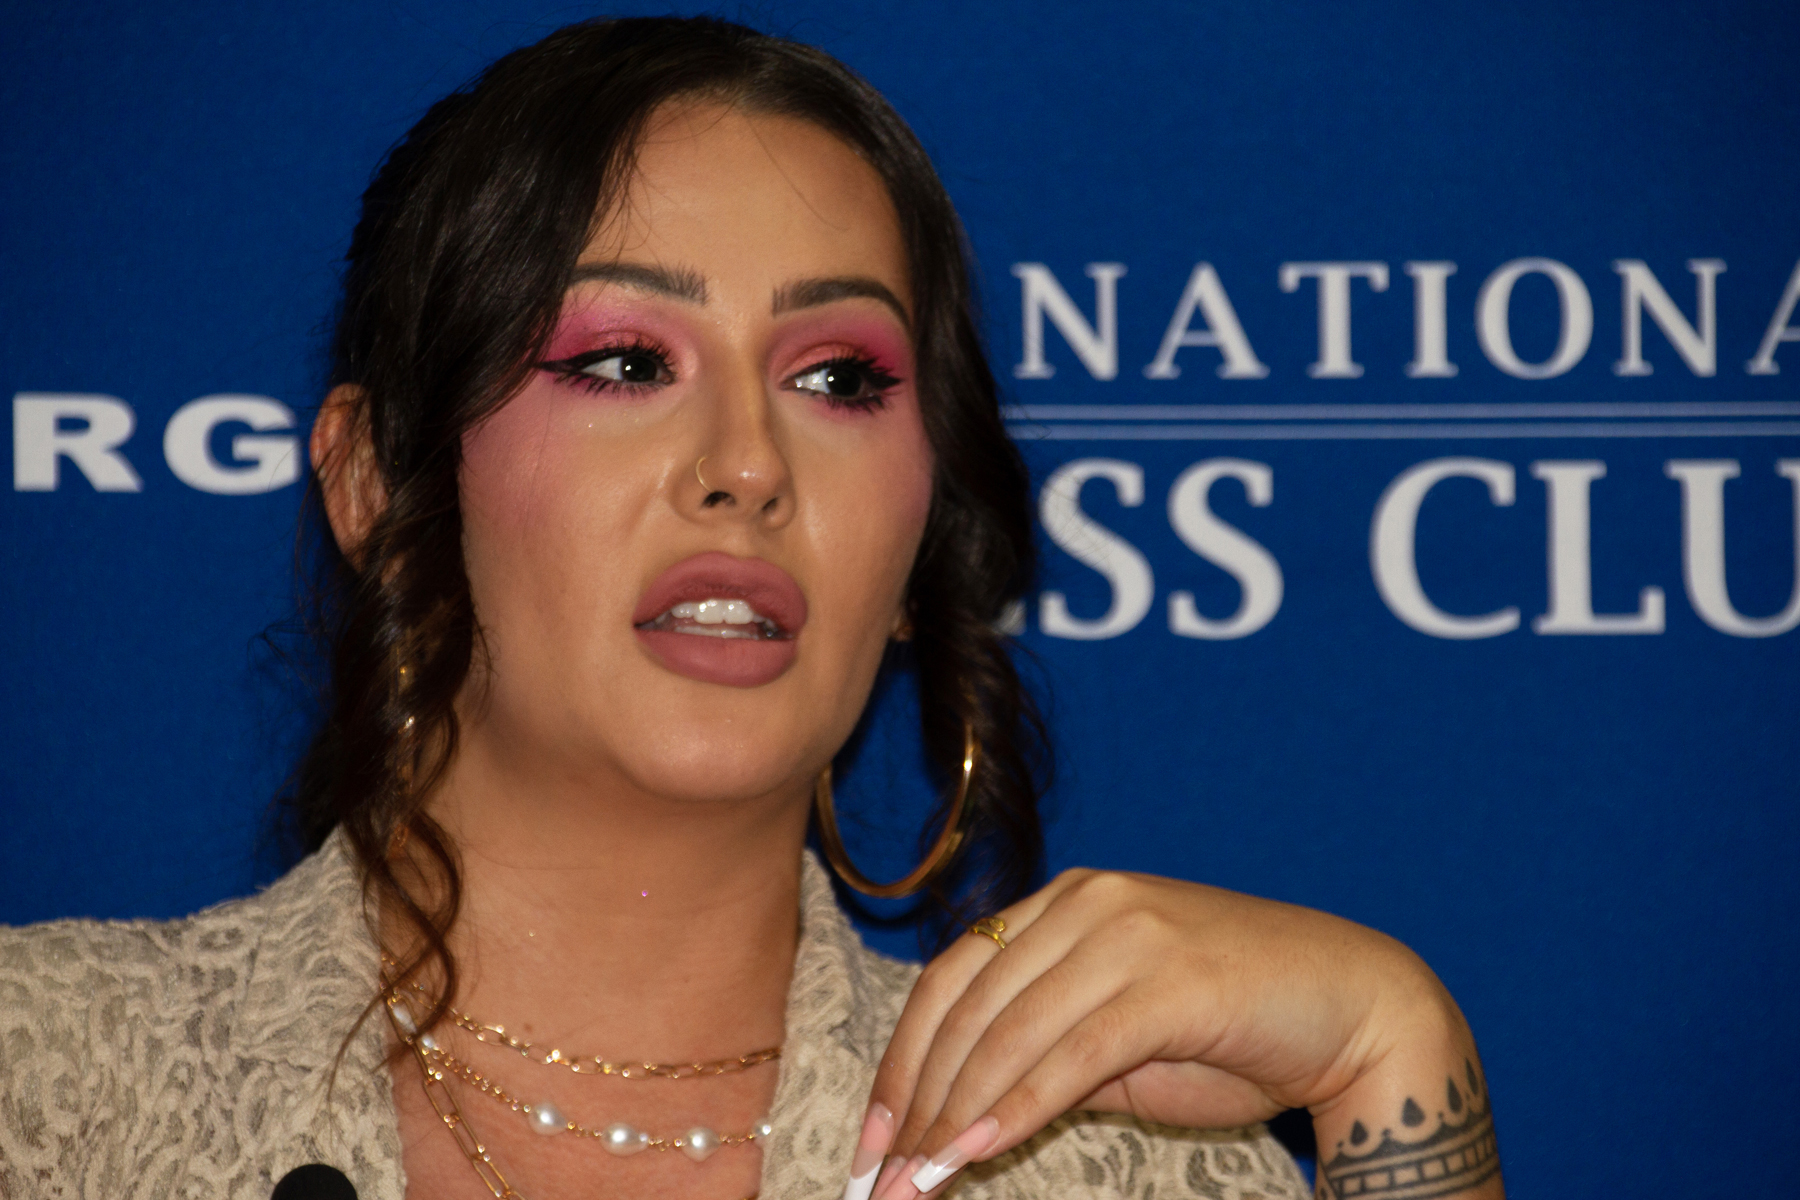 Rose Montoya said the anti-trans laws and rhetoric are taking a toll on her mental health. Photo: Nancy Shia